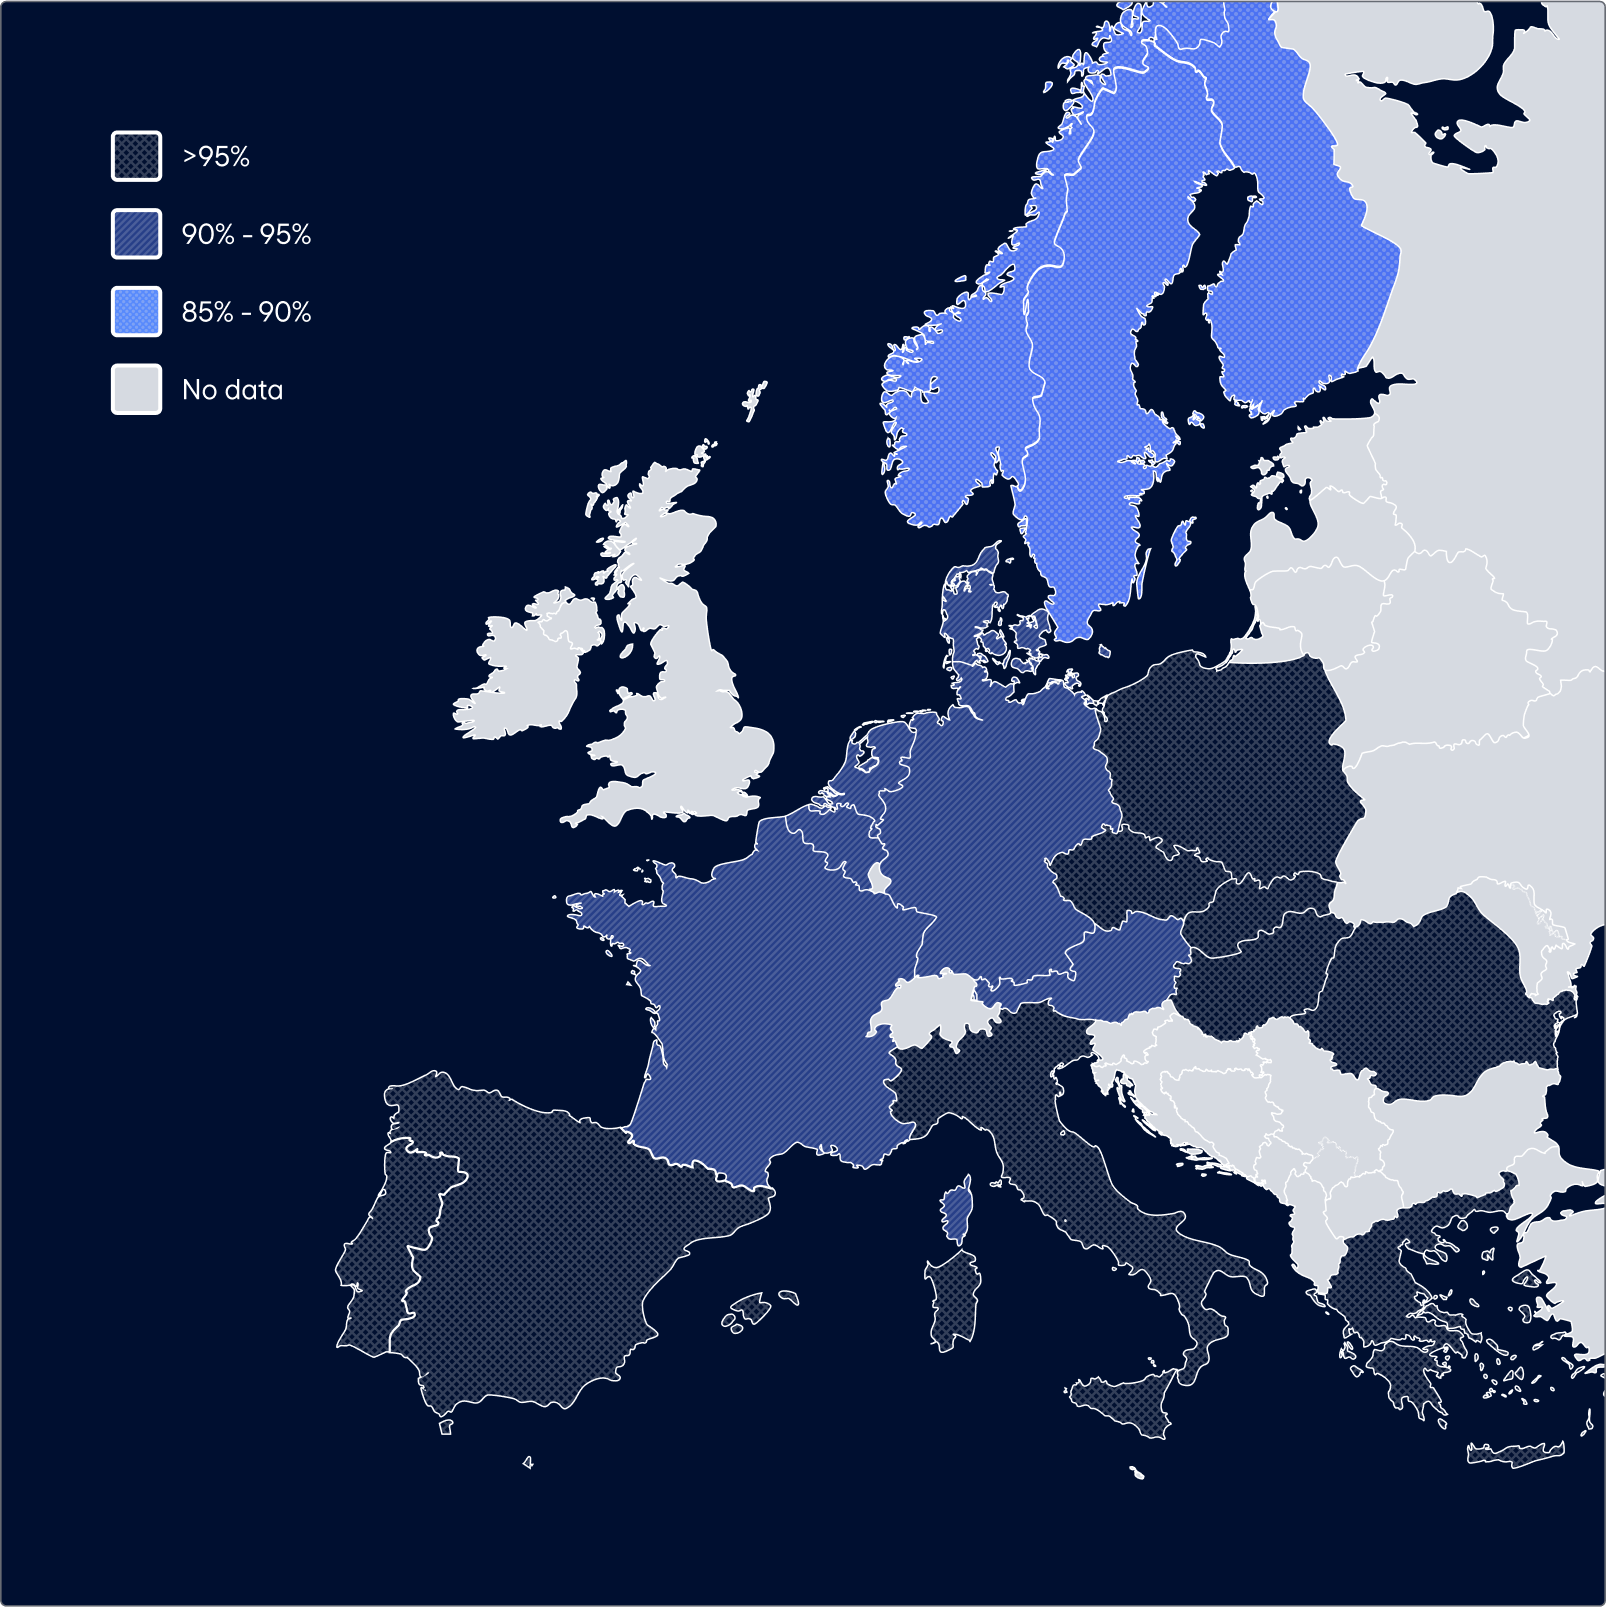 Map of Europe with results per country. Details in table below with caption Ranked test results per member state.